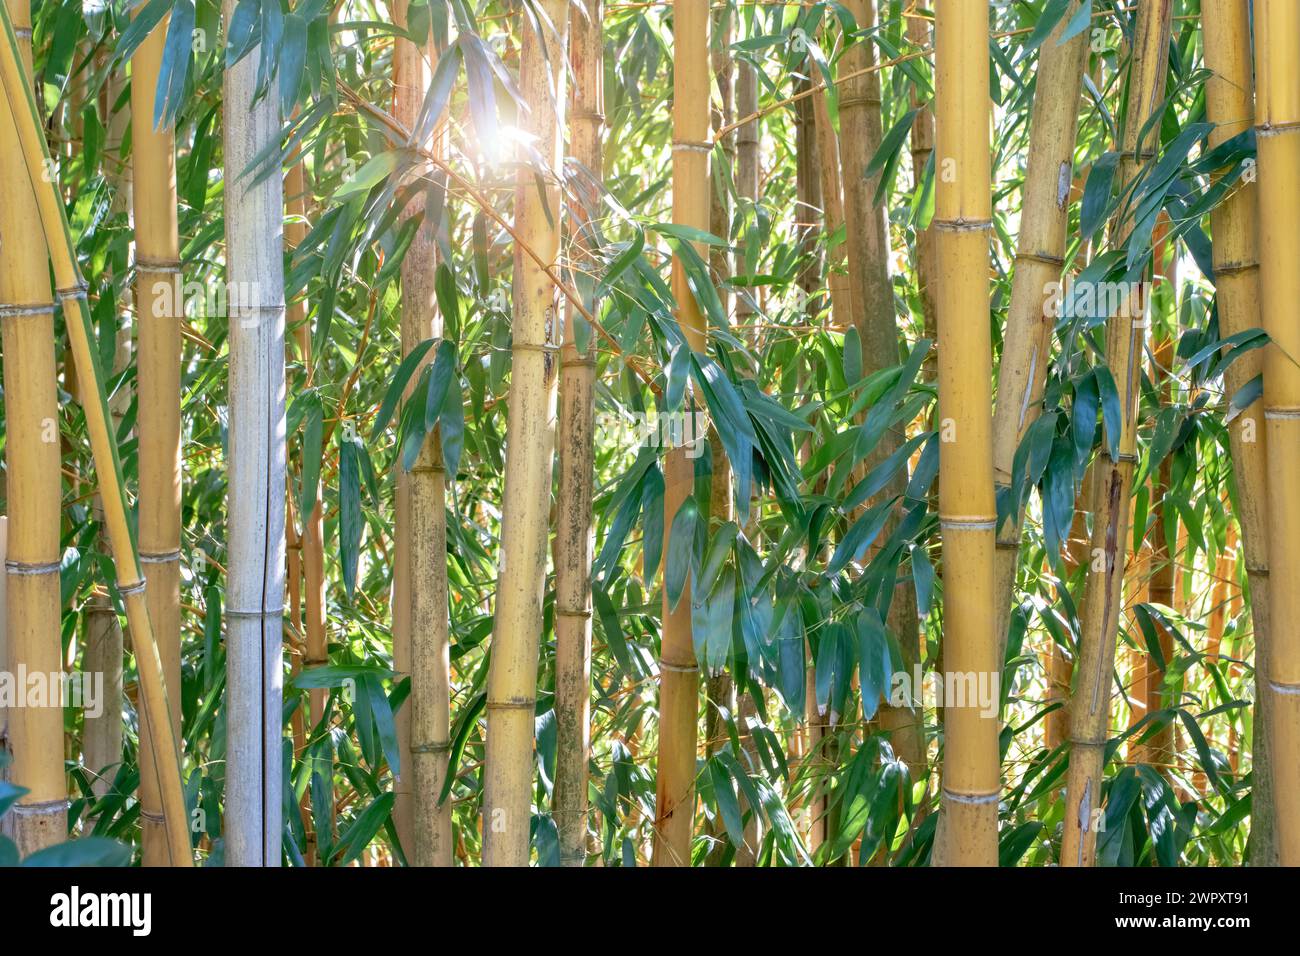 Bamboo stems and leaves in the sunny forest. Bambu plants background. Stock Photo